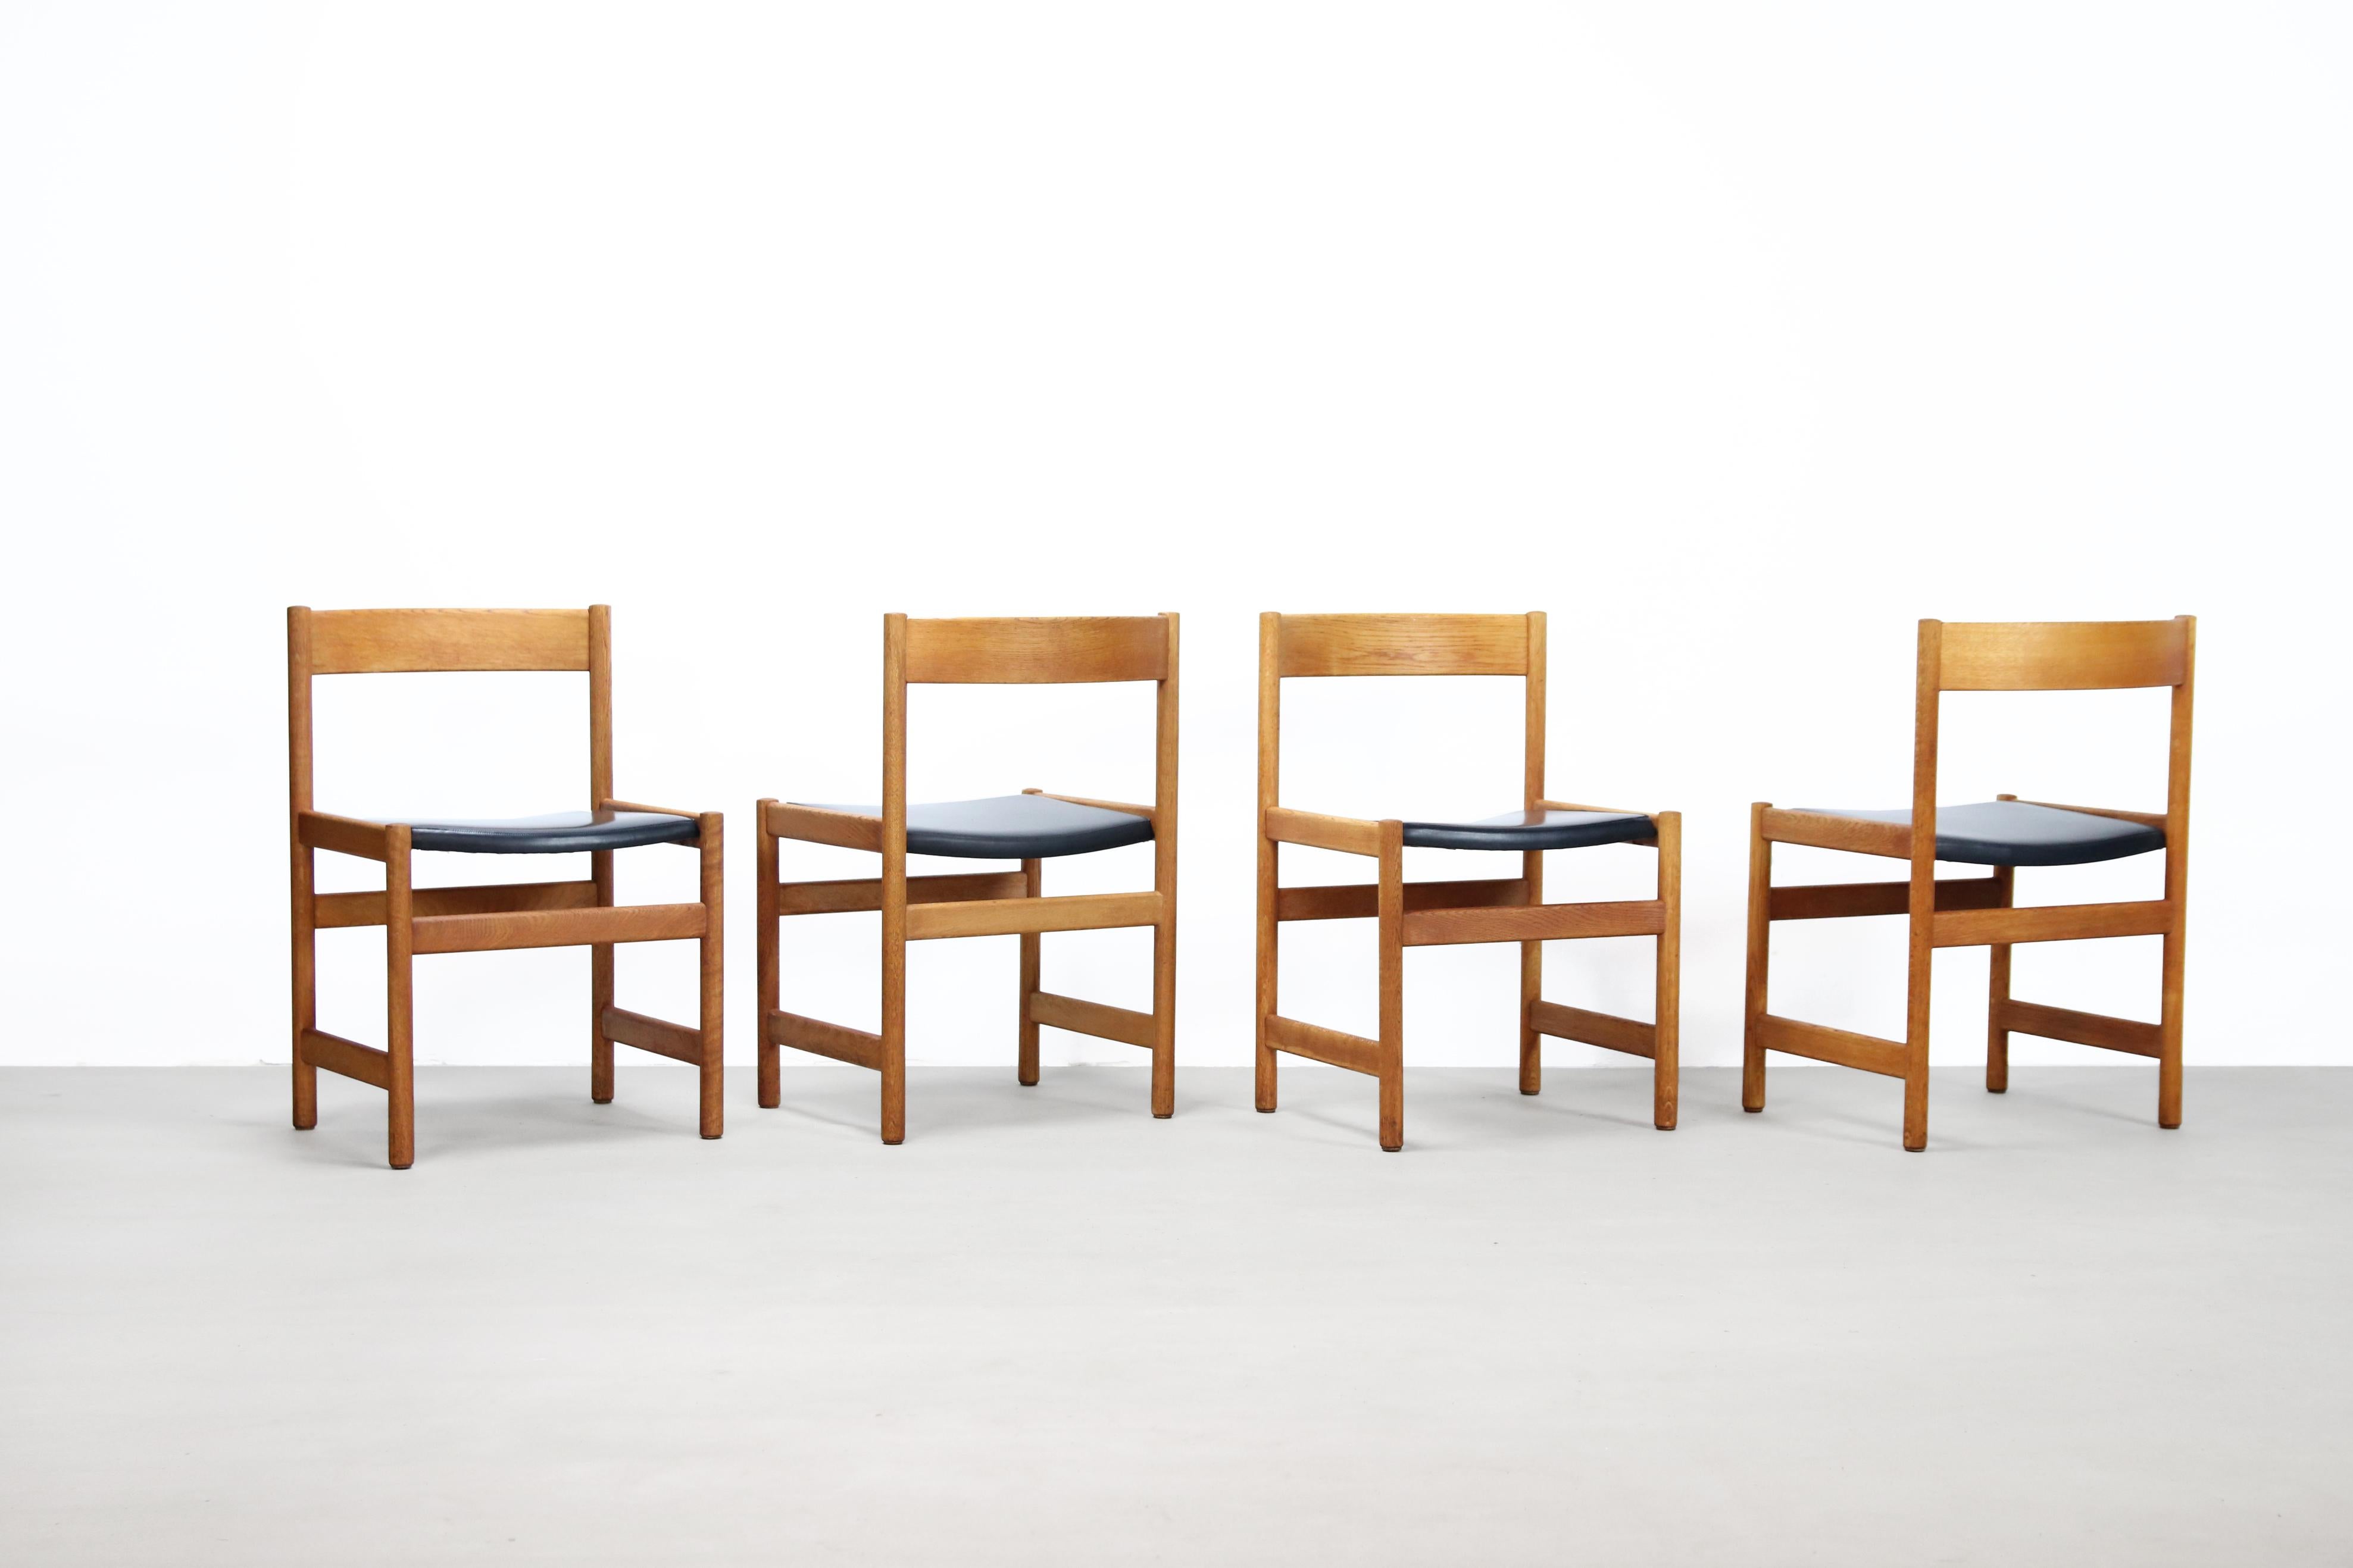 Beautiful set of four solid oak dining room chairs from the Triva series, designed by Yngvar Sandstrom from Sweden in the second half of the 20th century. The seats are upholstered in a black faux leather, which is very easy to clean. The woodwork